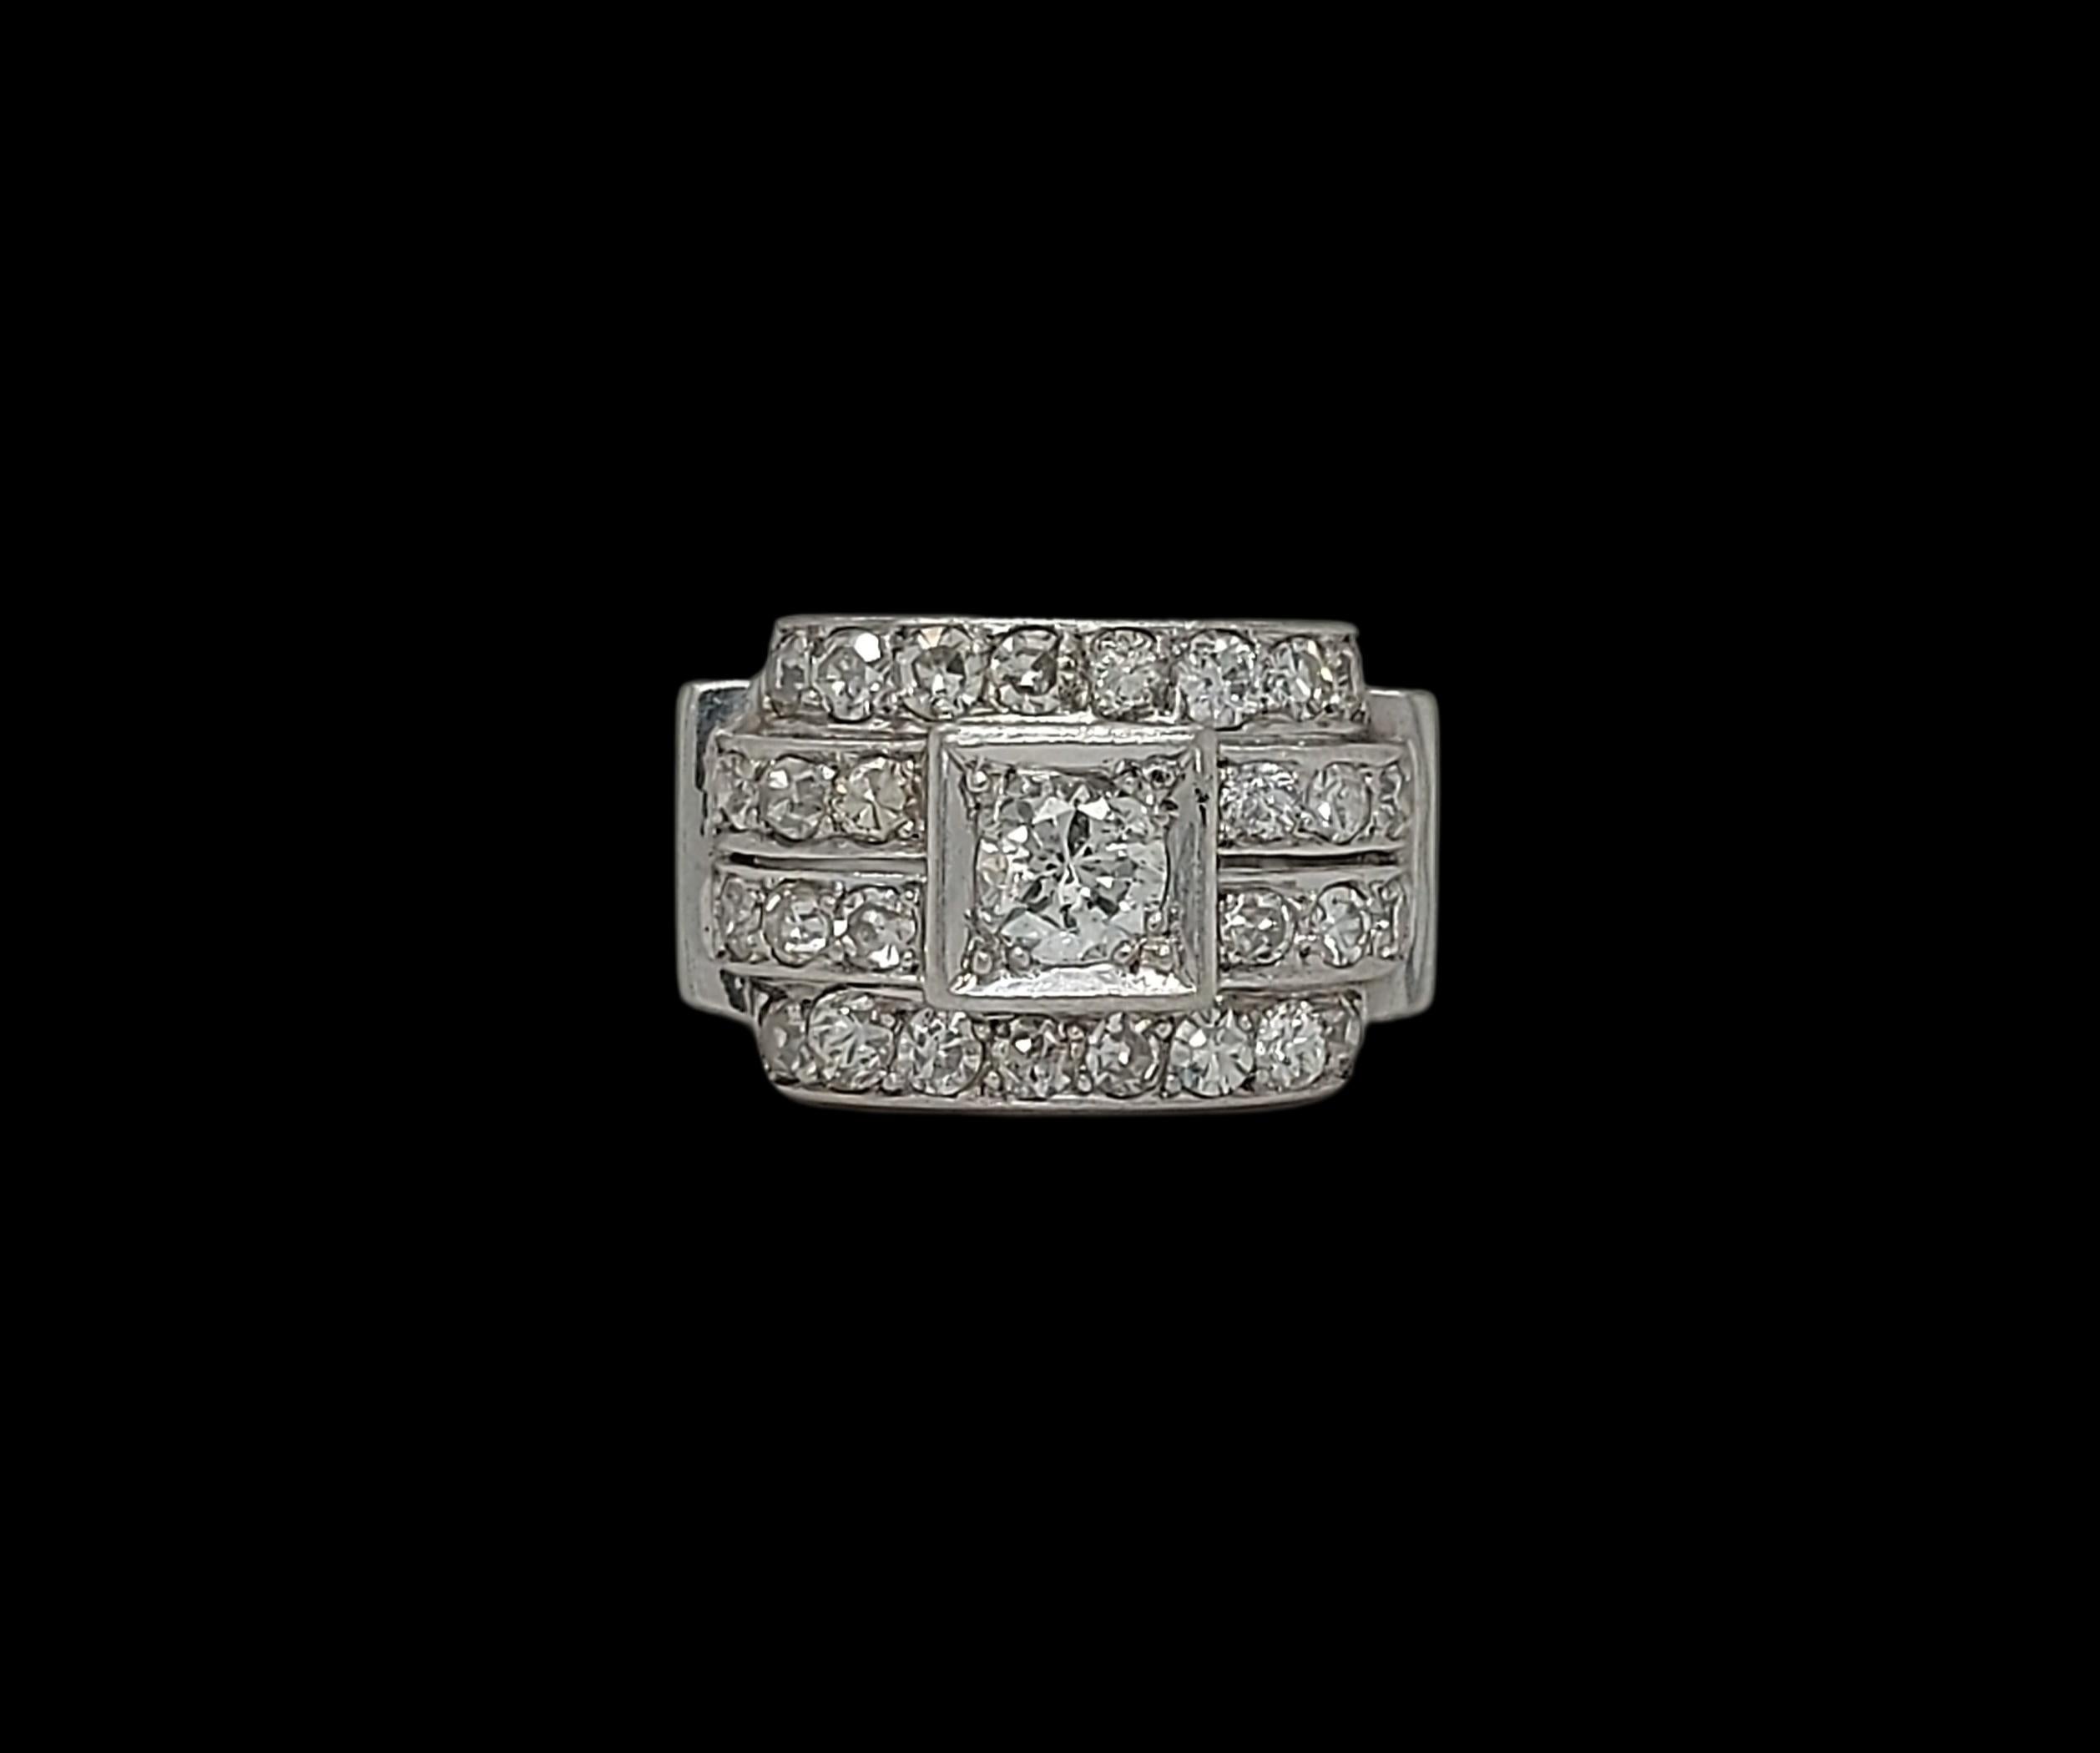 Platinum 1940 s Ring Set with 1.34ct Diamonds

Diamonds: 27 Round cut diamonds. Centre diamond 0.3 ct Surrounded by 1.04 ct Together 1.34ct Diamonds

Material: Solid Platinum 0.950

Ring size: 50 EU / 5.25 US ( can be resized for free)

Total